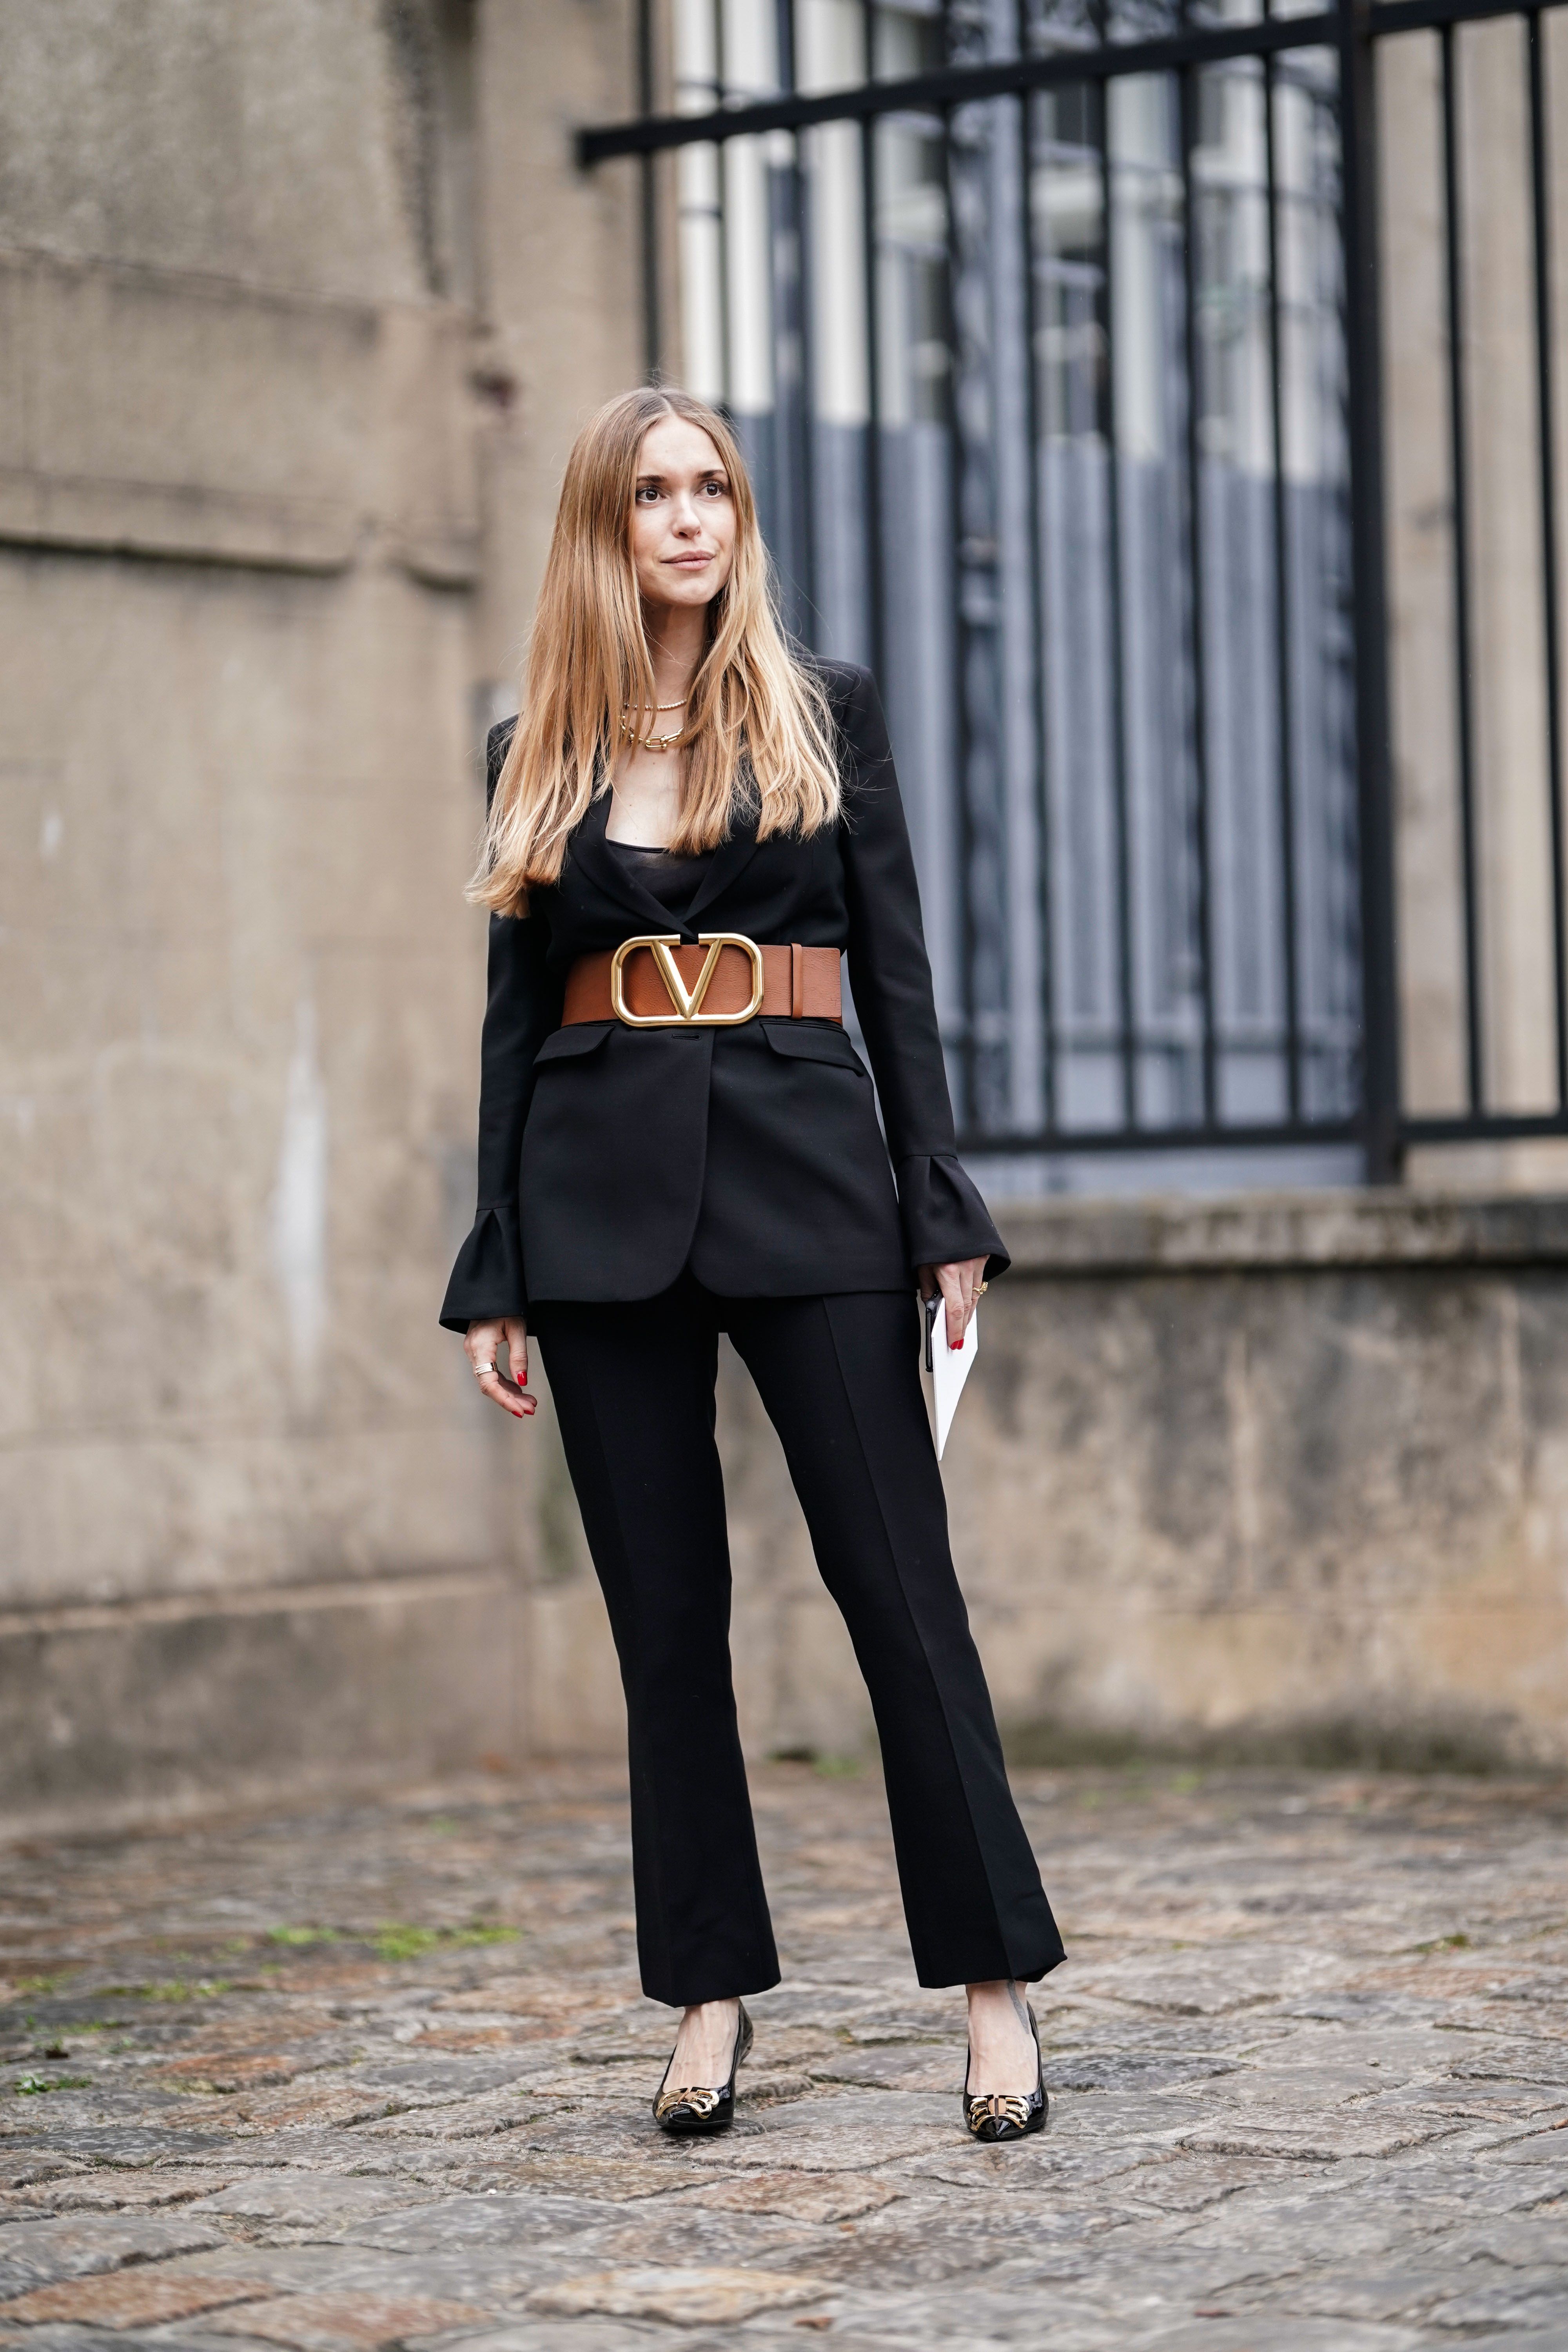 outfits to inspire your workwear wardrobe this January